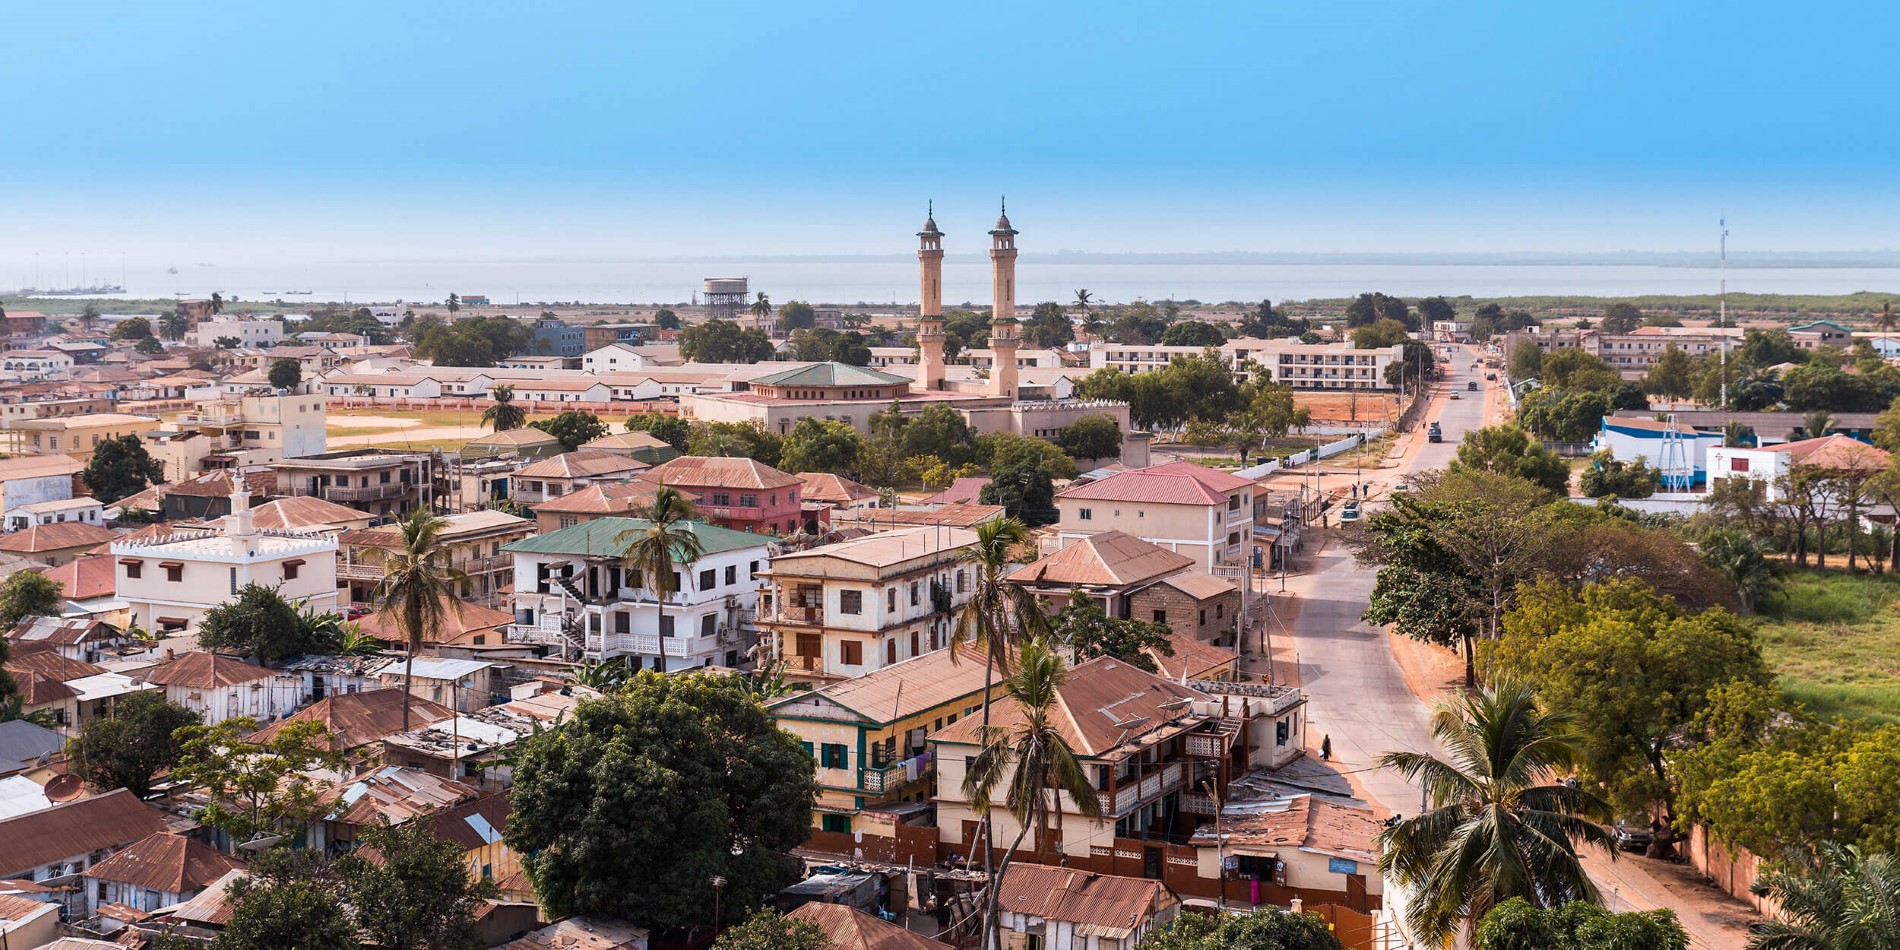 Image from the city of Banjul in Gambia